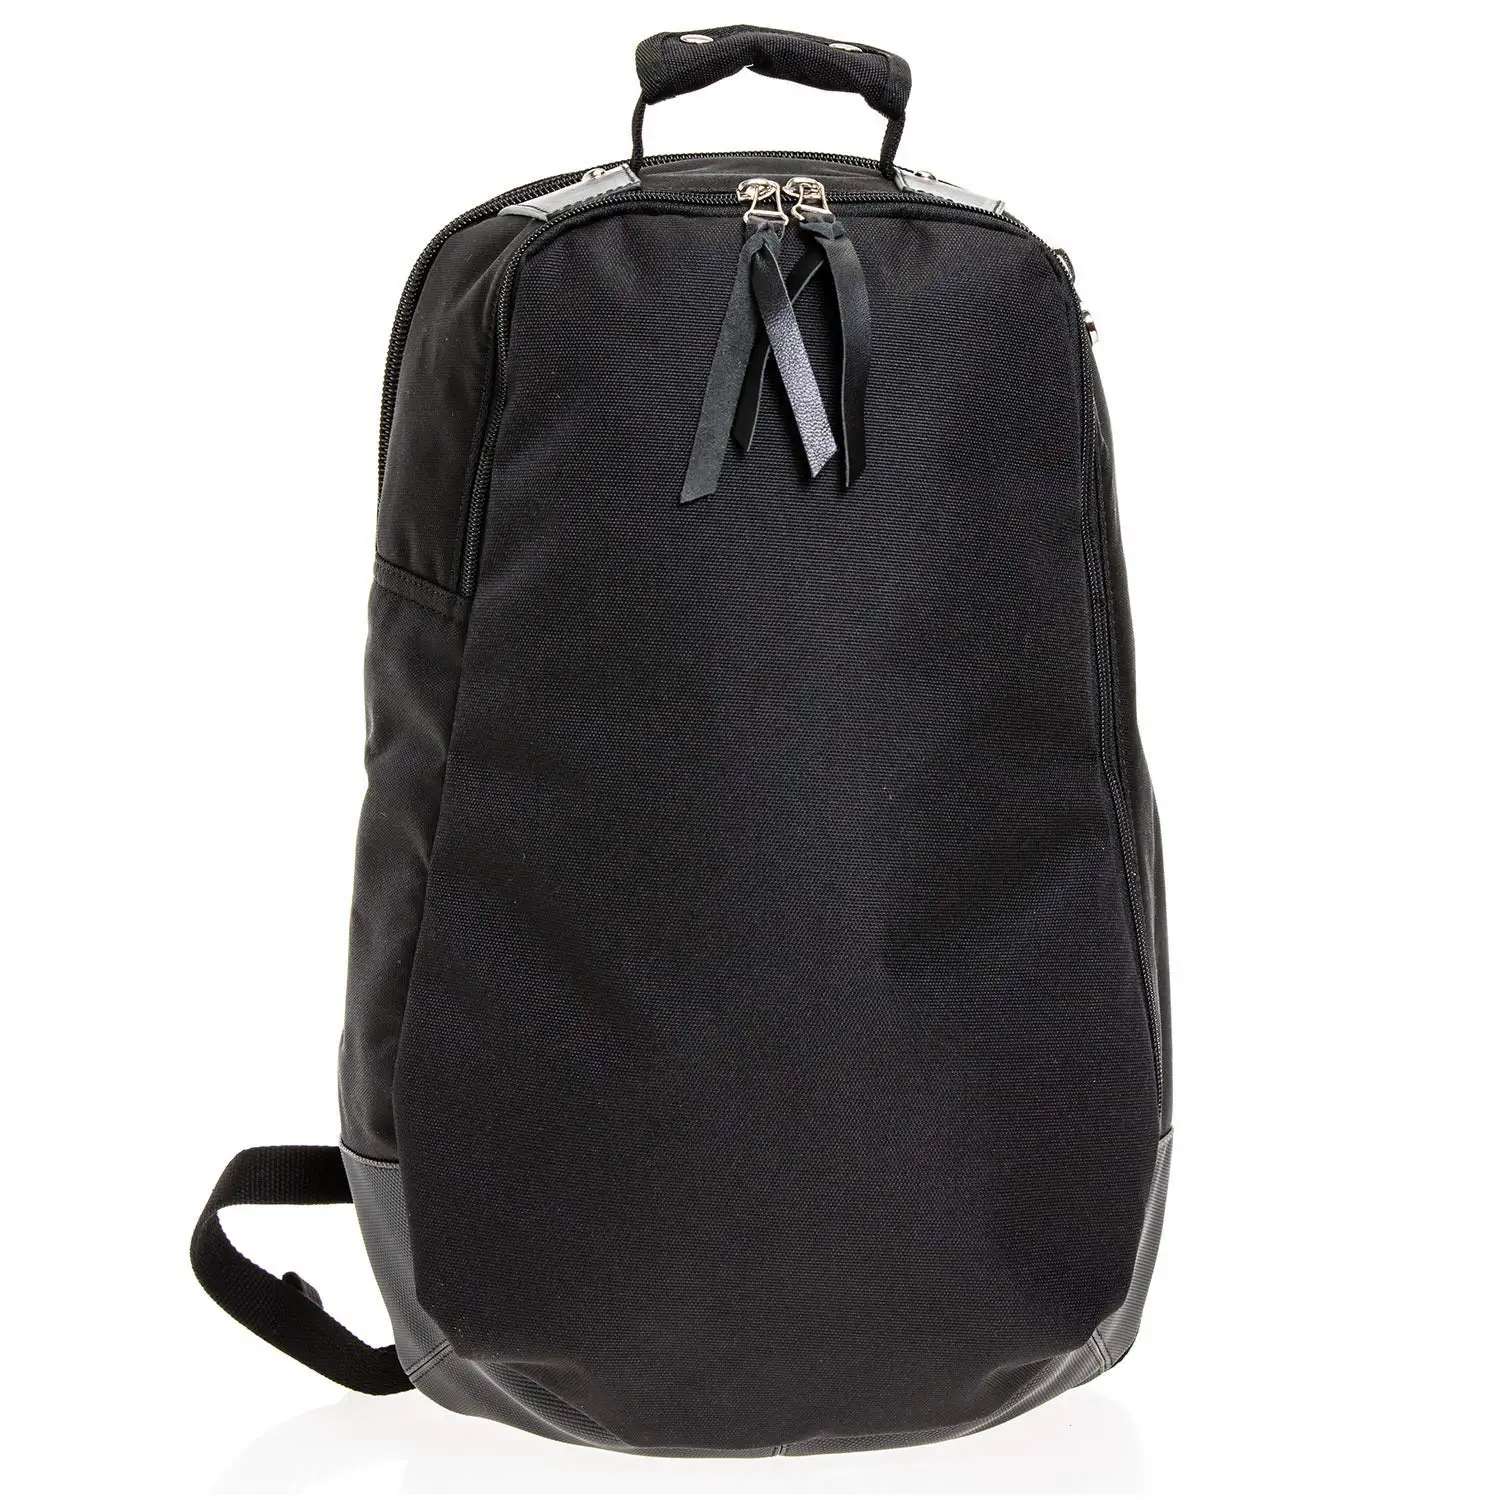 Cheap Spacious Backpack Find Spacious Backpack Deals On Line At Alibaba Com - phoenix roblox backpack